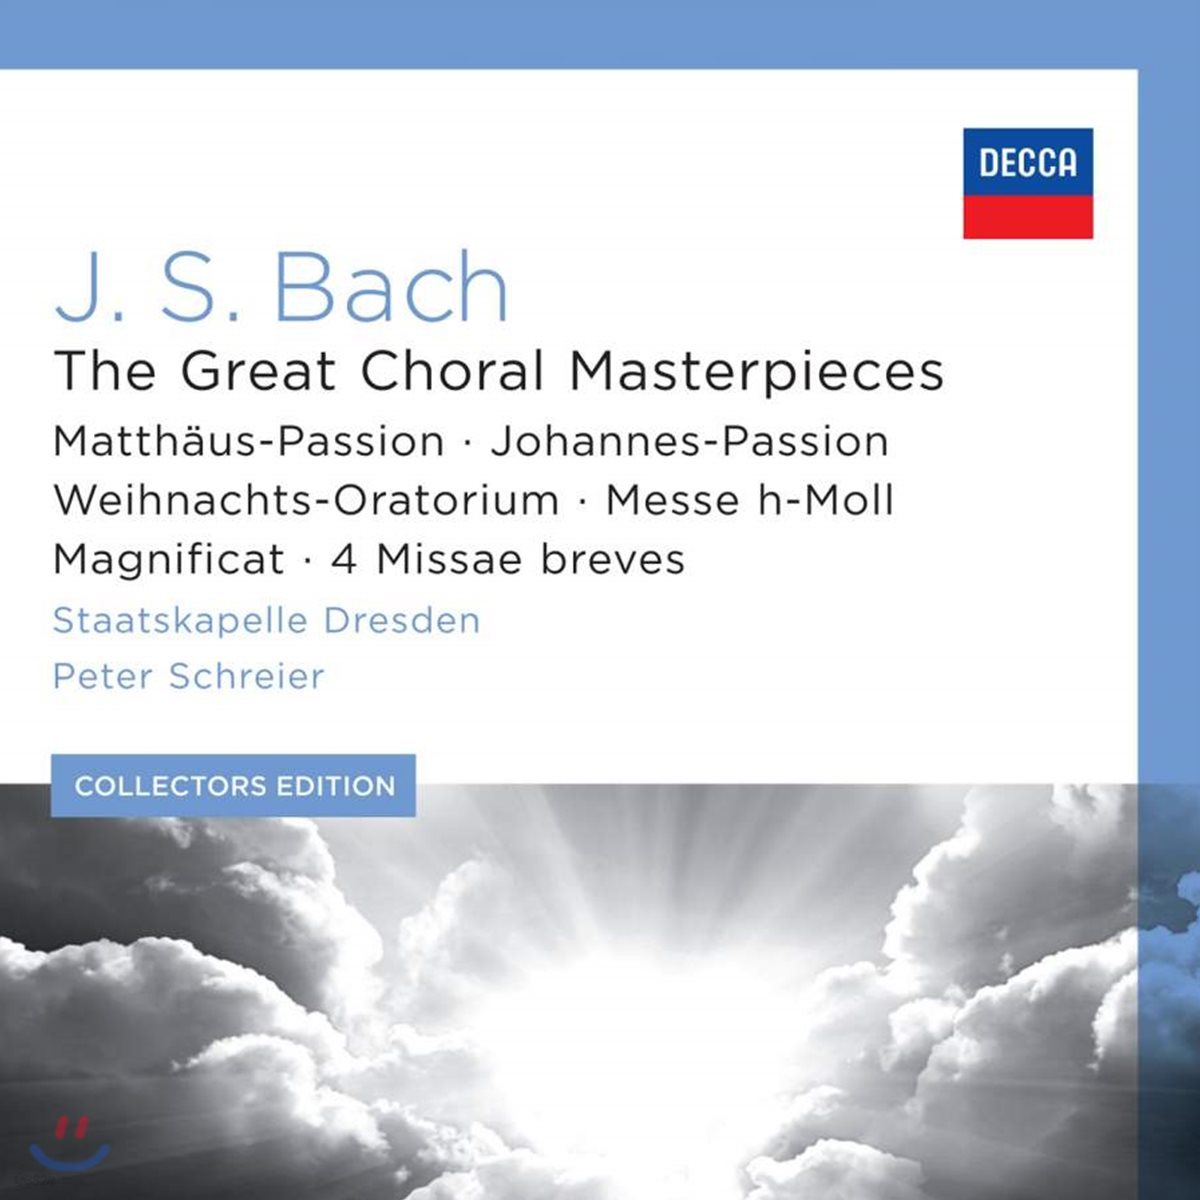 Peter Schreier 바흐: 위대한 합창음악 (Bach: Great Choral Masterpieces)